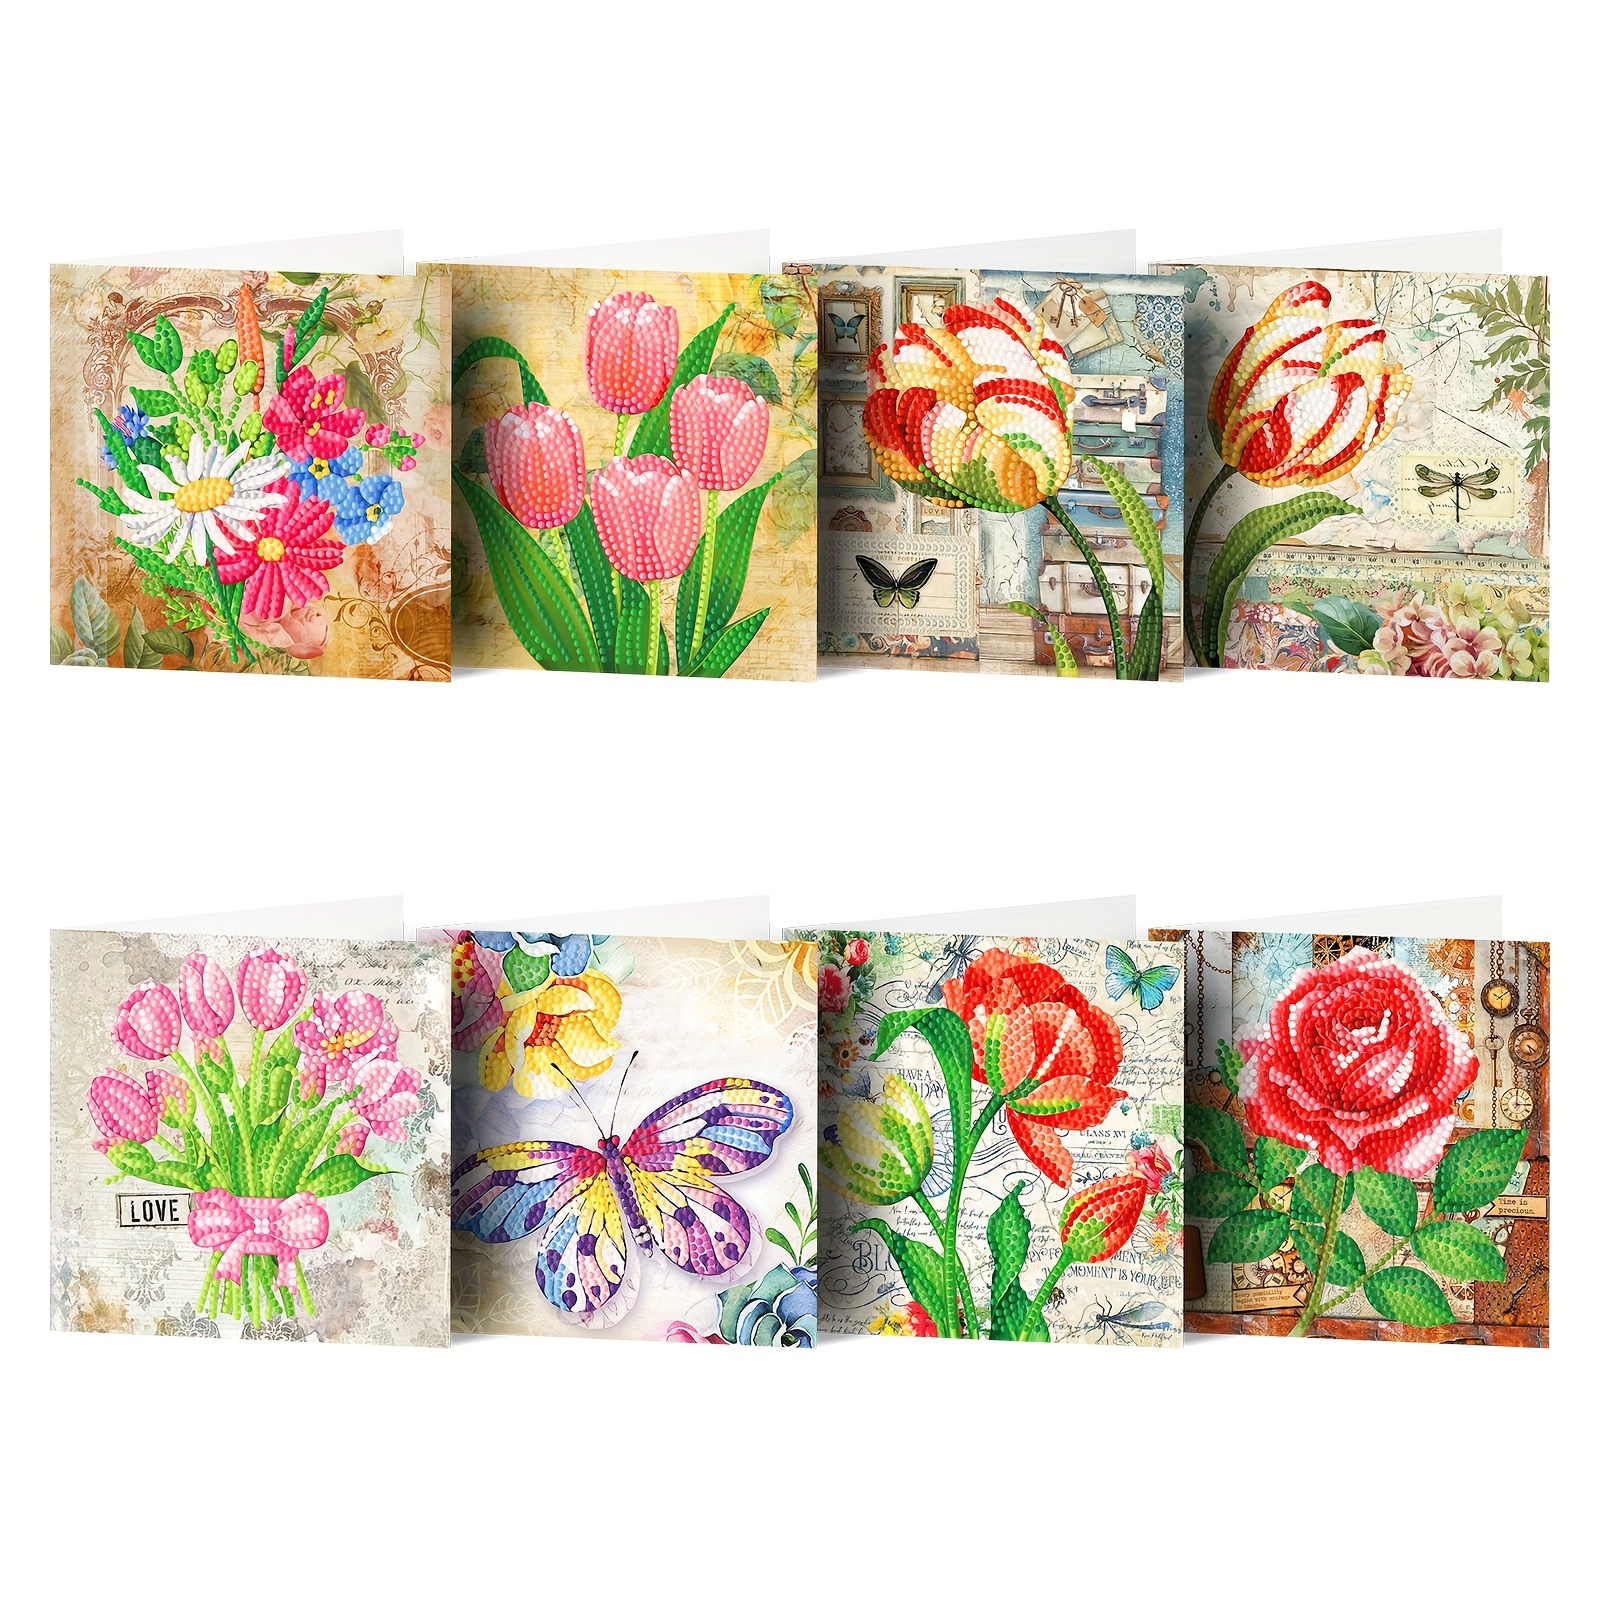  DIY Birthday Cards - 12 pcs 5D Special Shaped Diamond Painting  Greeting Cards for Birthday and Holiday - Mosaic Making Greeting Cards Art  Craft Gifts for Family and Friends : Office Products